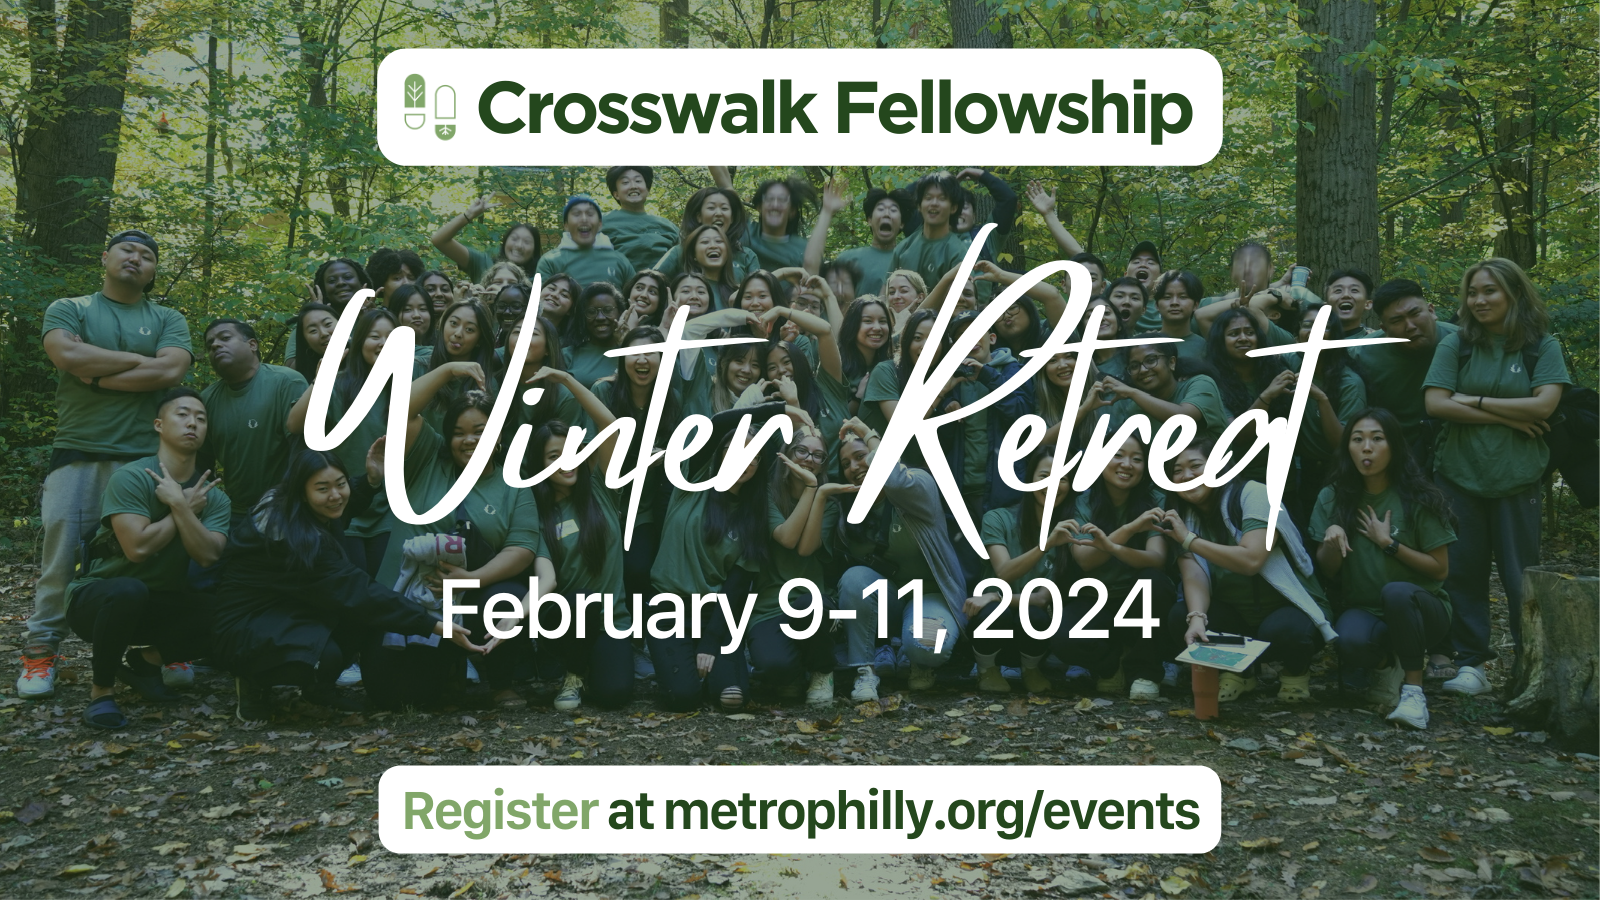 All college students are invited to Crosswalk Fellowship's Winter Retreat!